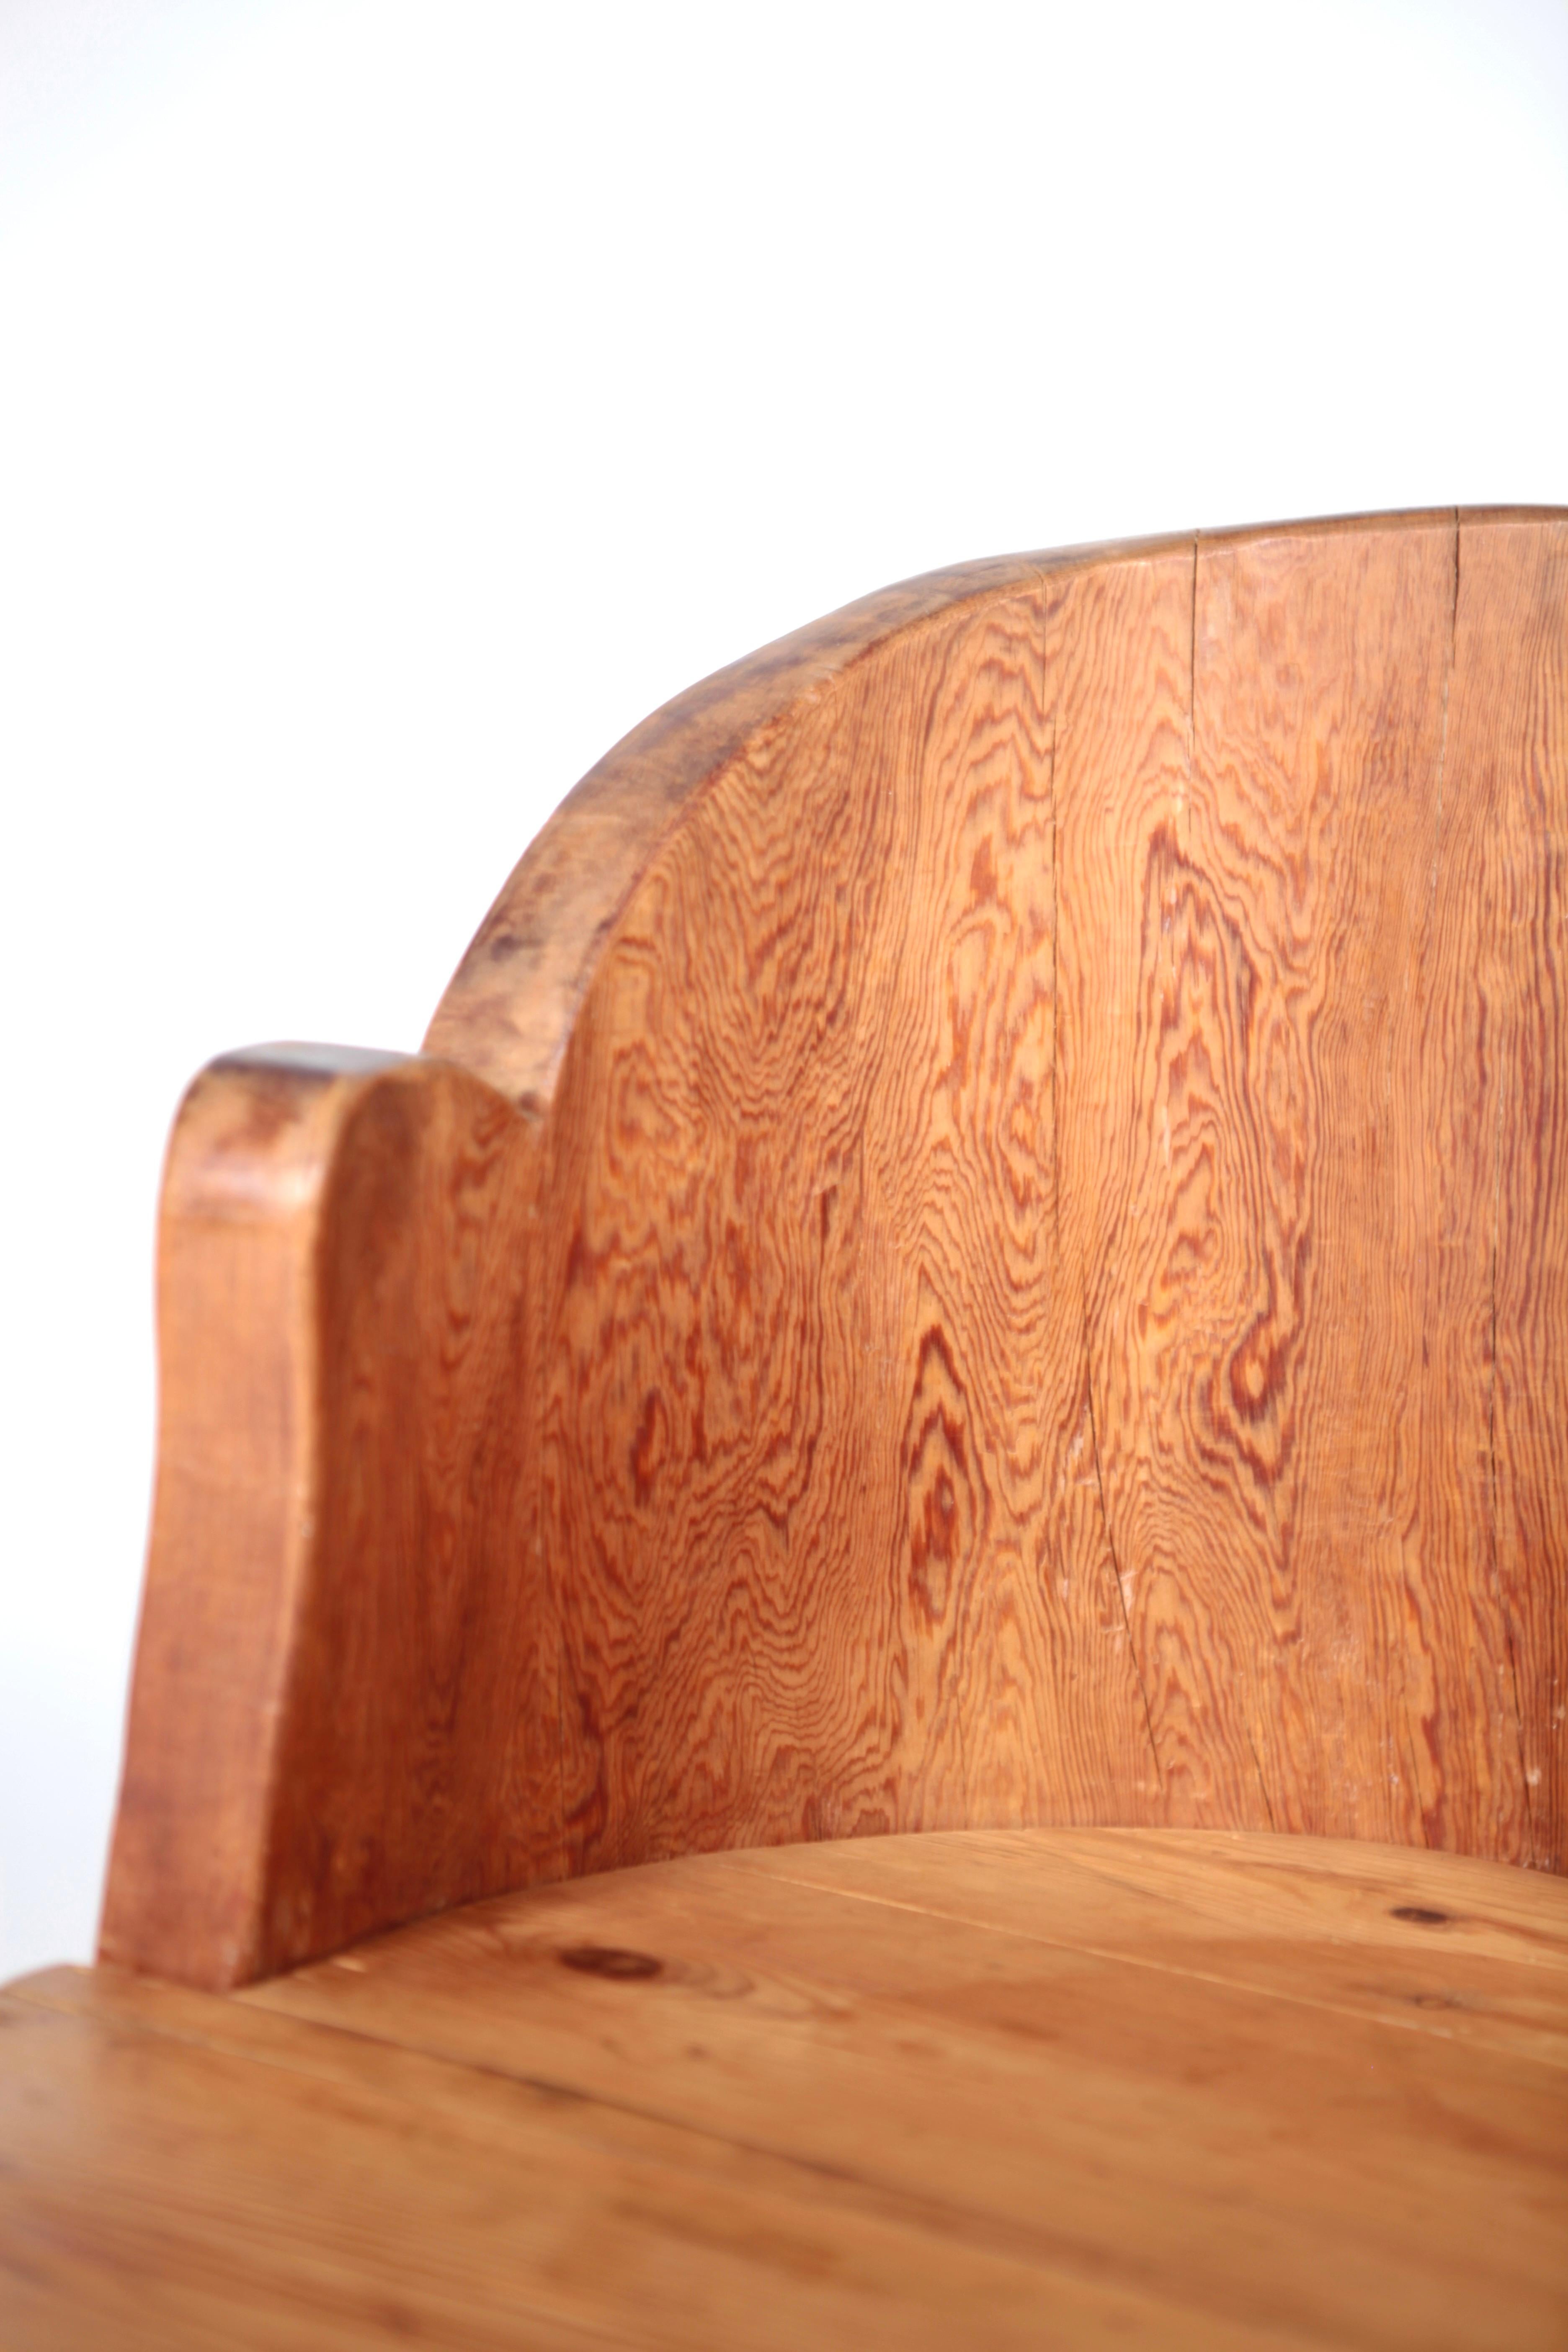 Stump Chair in Pine, Mora, Sweden 1930s. For Sale 2